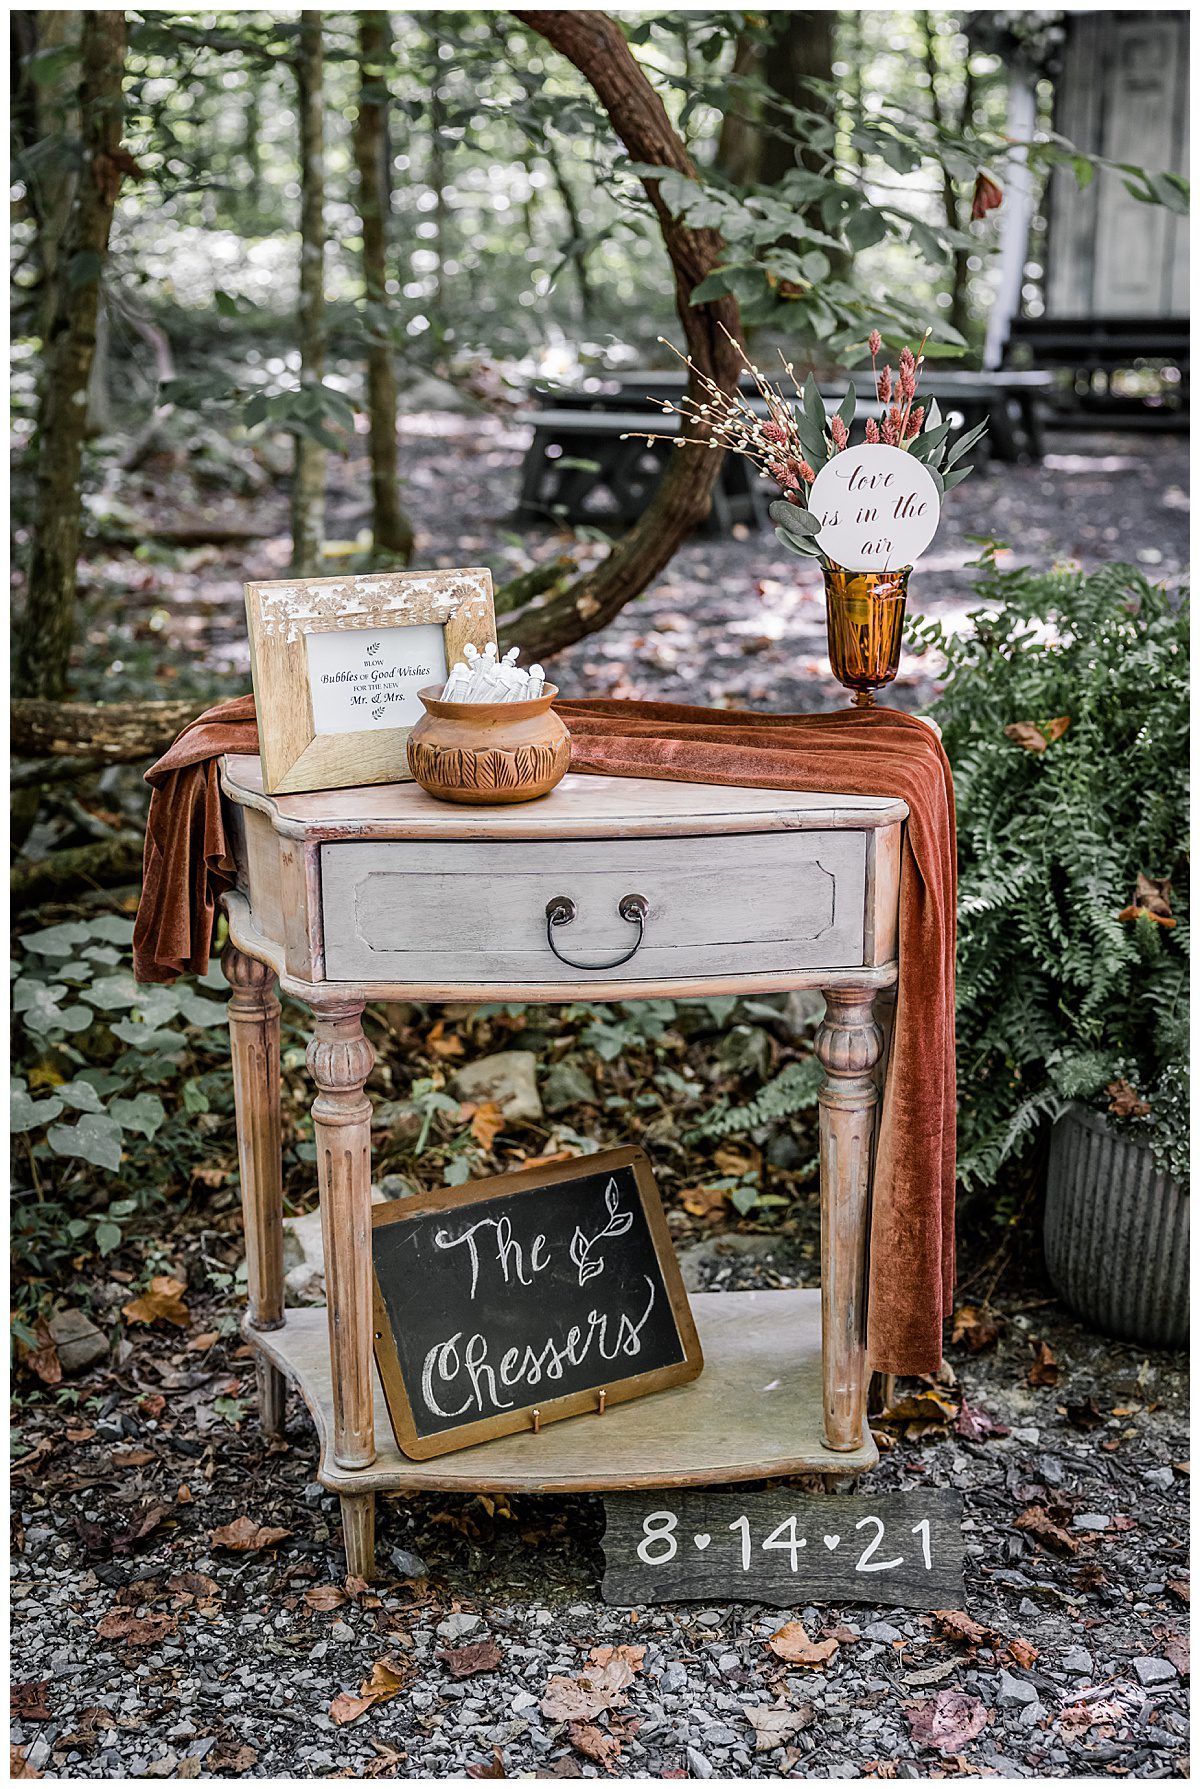 micro wedding in the forest